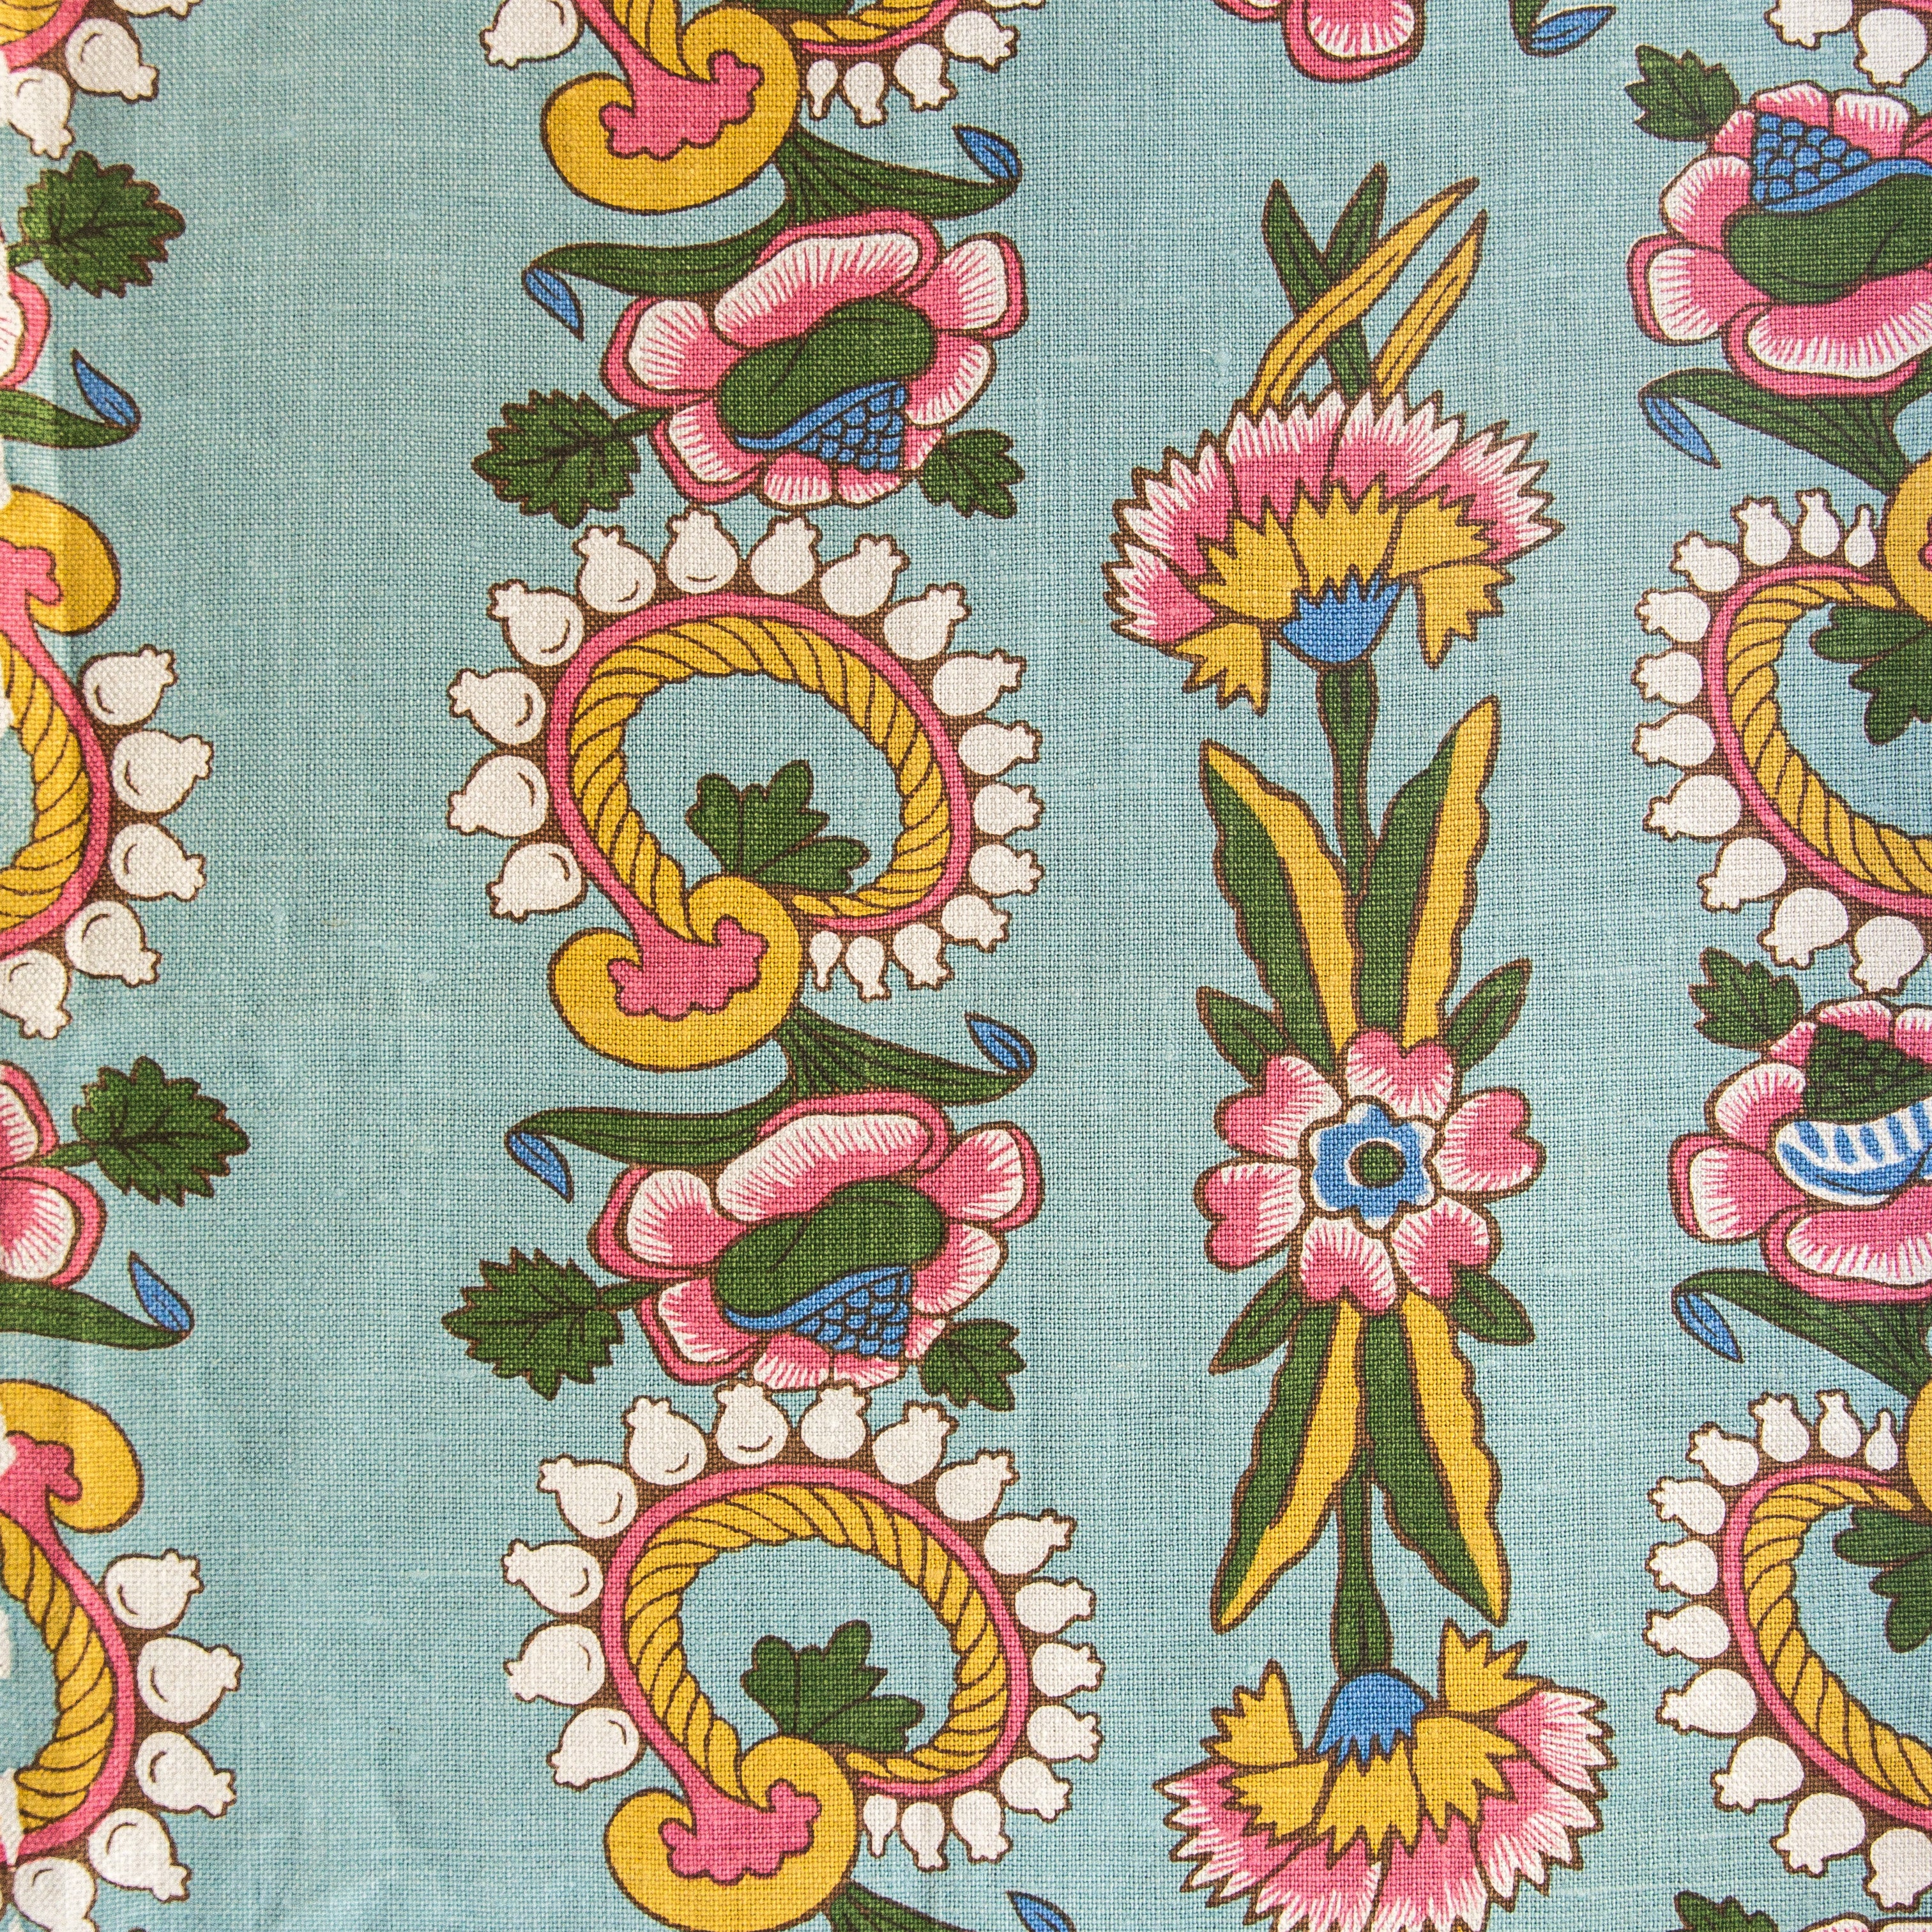 Detail of fabric in a dense floral stripe in pink, yellow and green on a teal field.